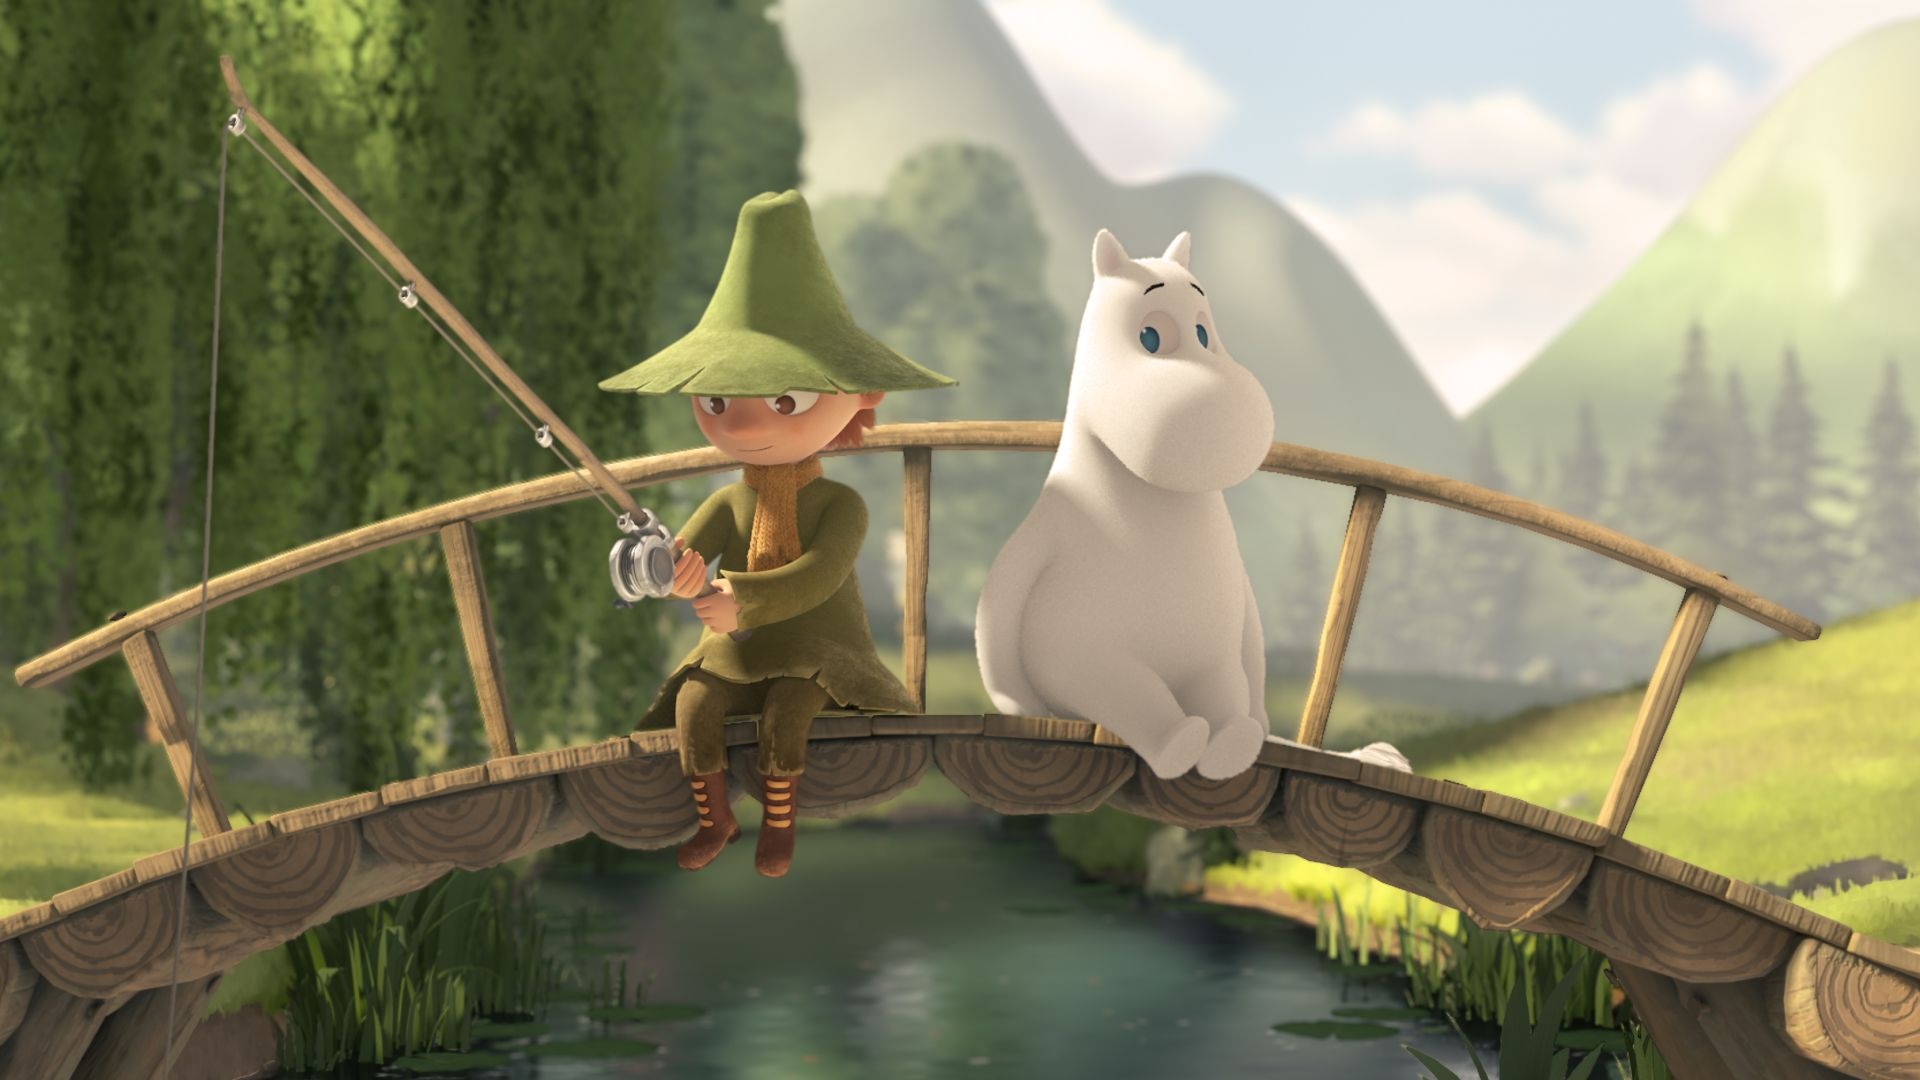 Moomin: Created by Swedish-speaking Finnish author and illustrator Tove Jansson. 1920x1080 Full HD Wallpaper.